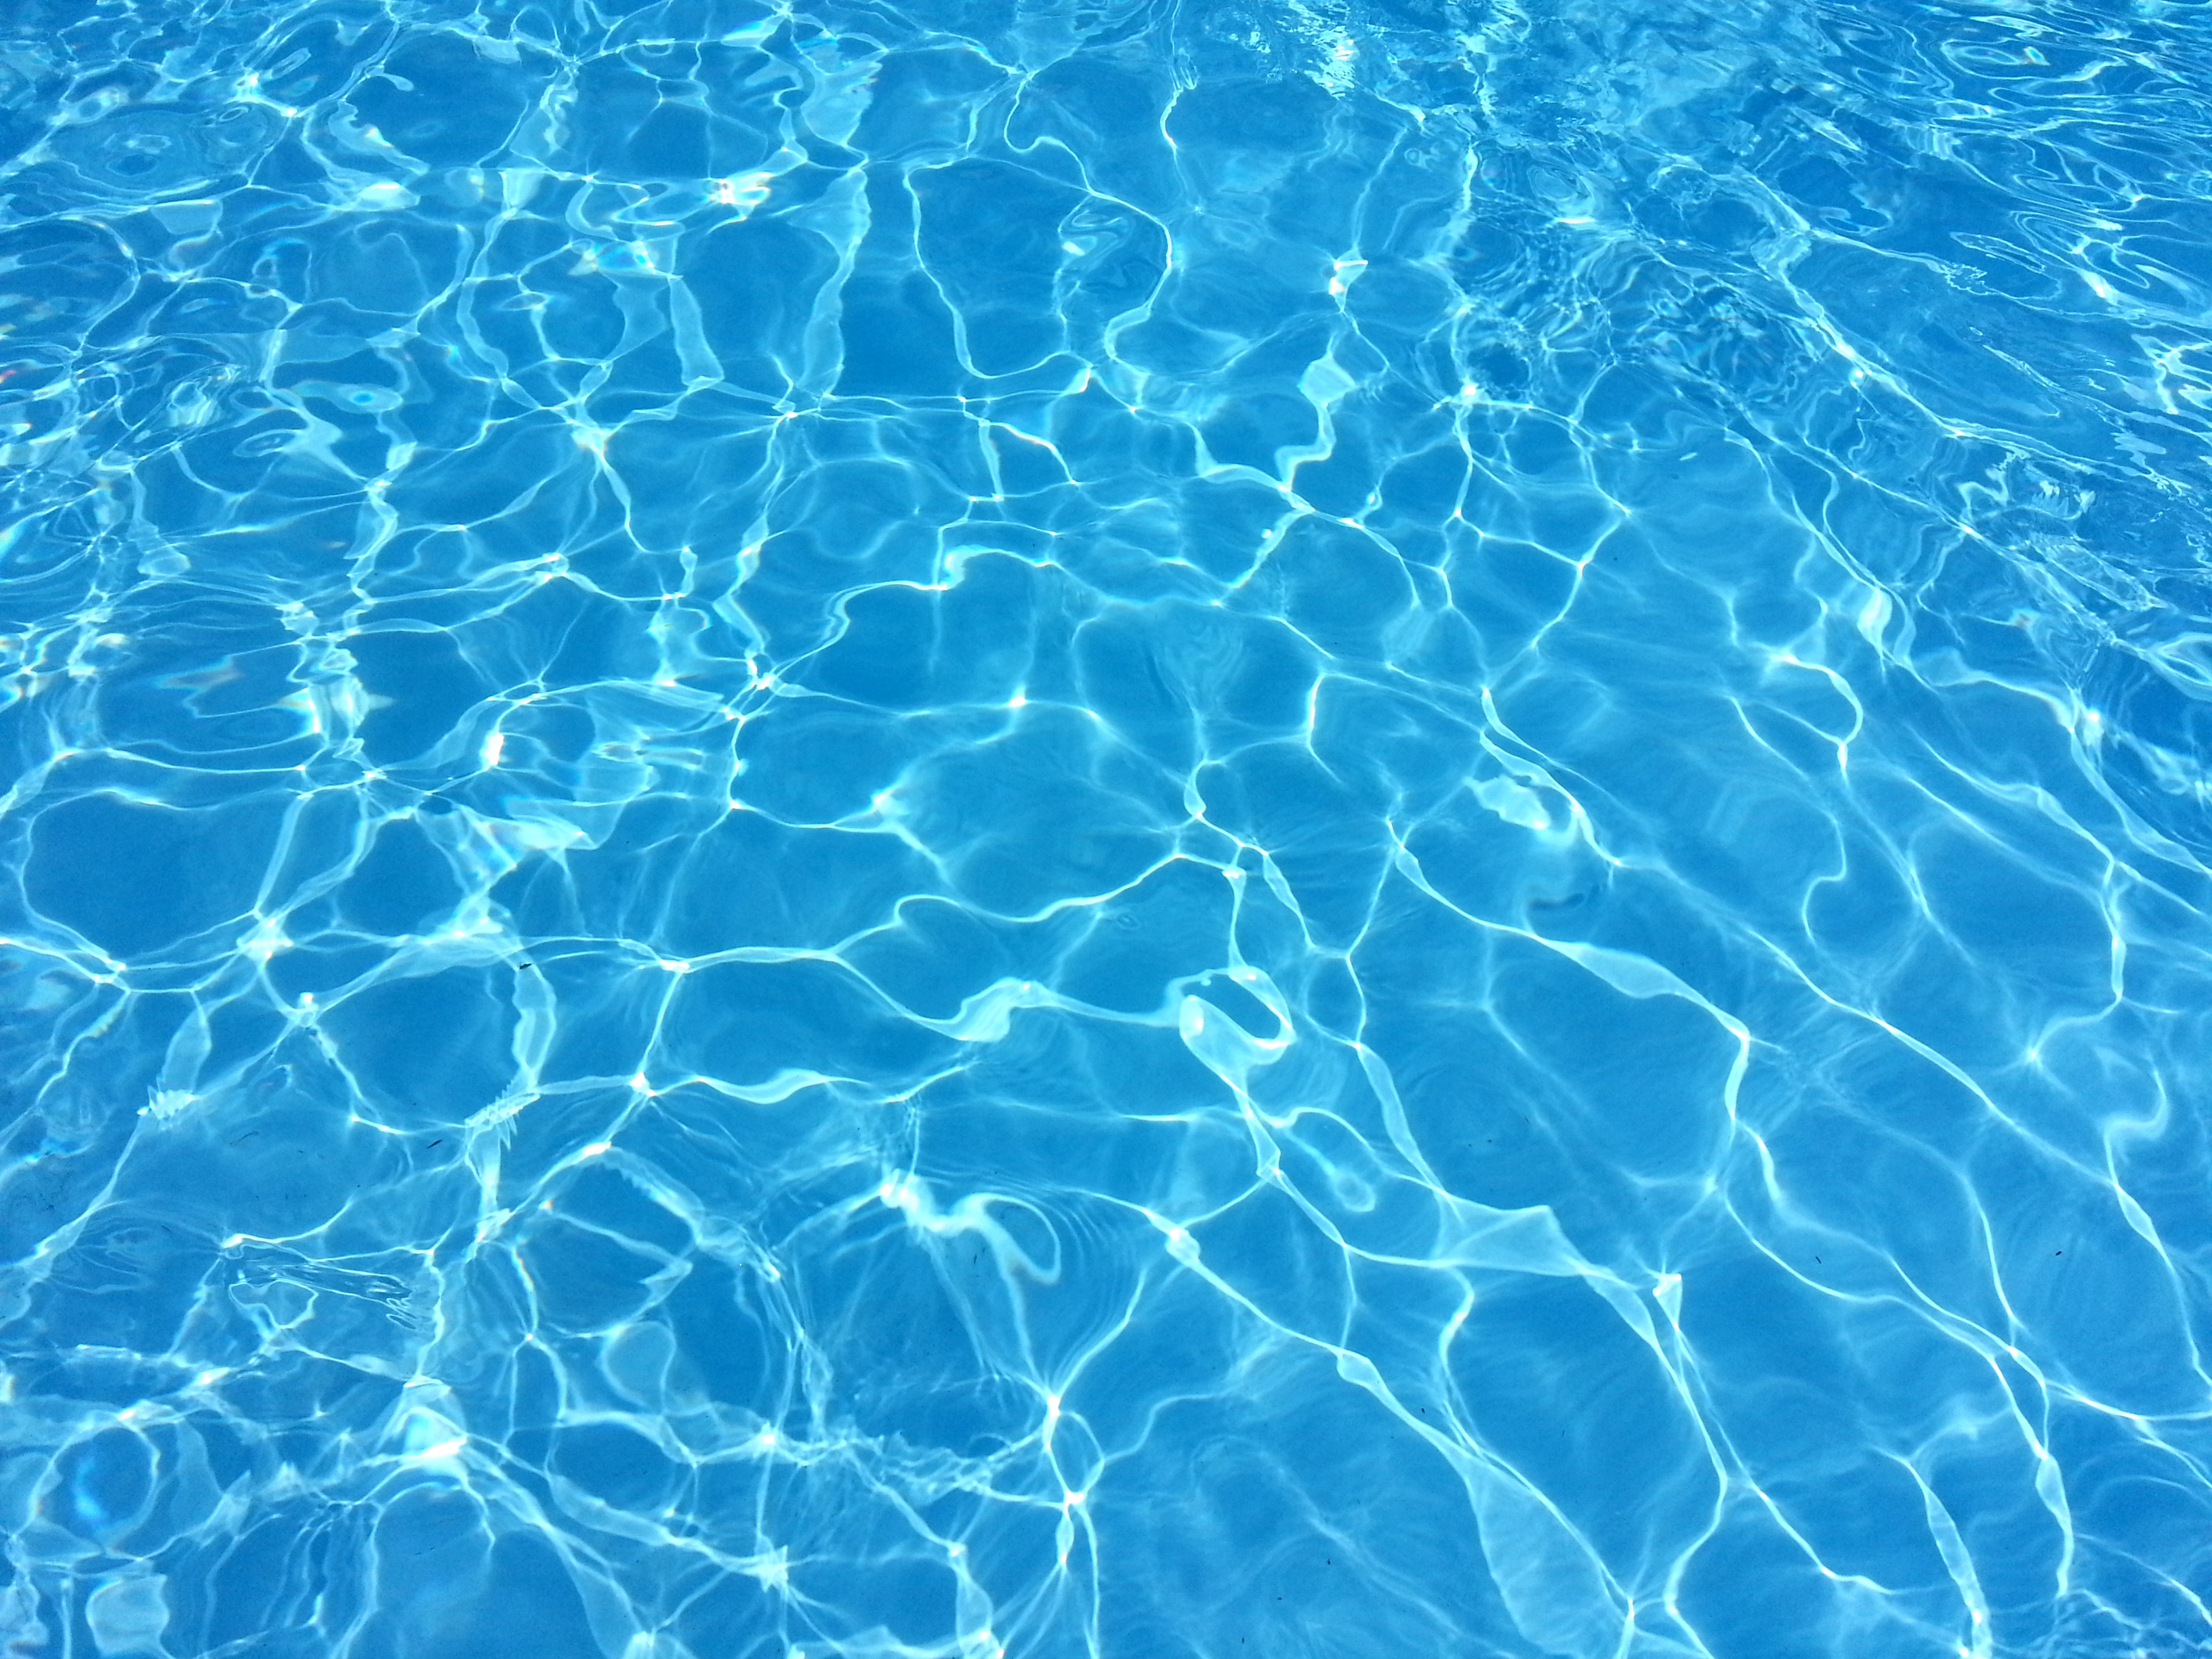 Are Fiberglass Pools Toxic? A Look at Their Environmental Impact